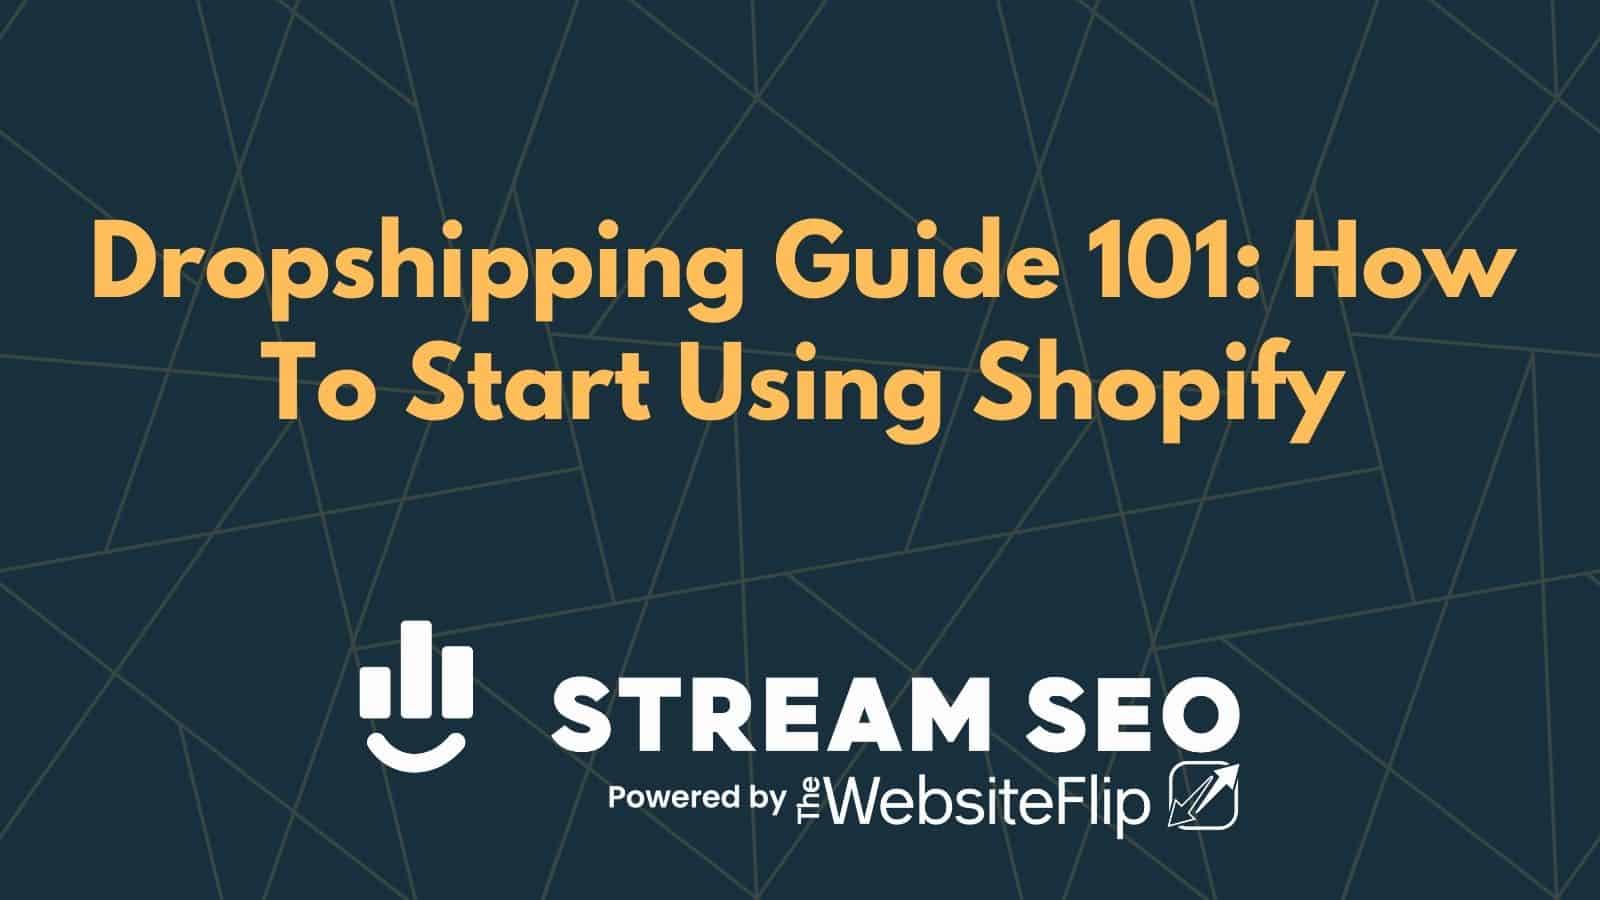 Dropshipping Guide 101: How To Start Using Shopify